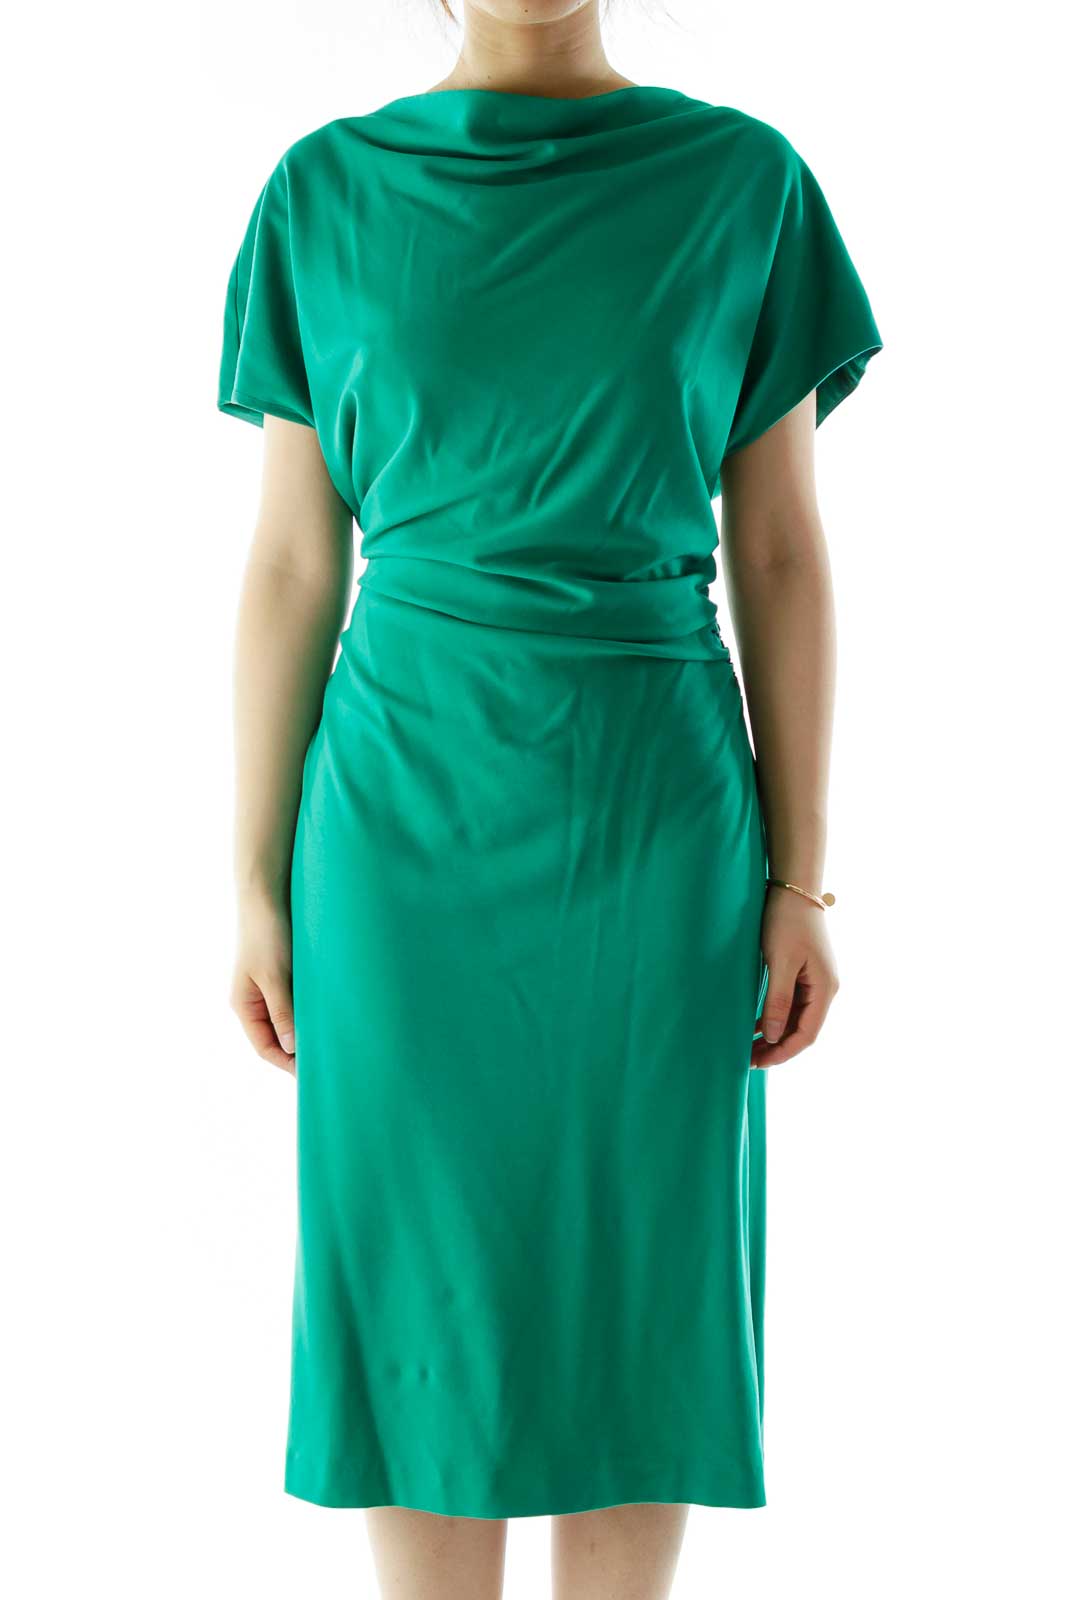 Green Scrunched Cocktail Dress Front